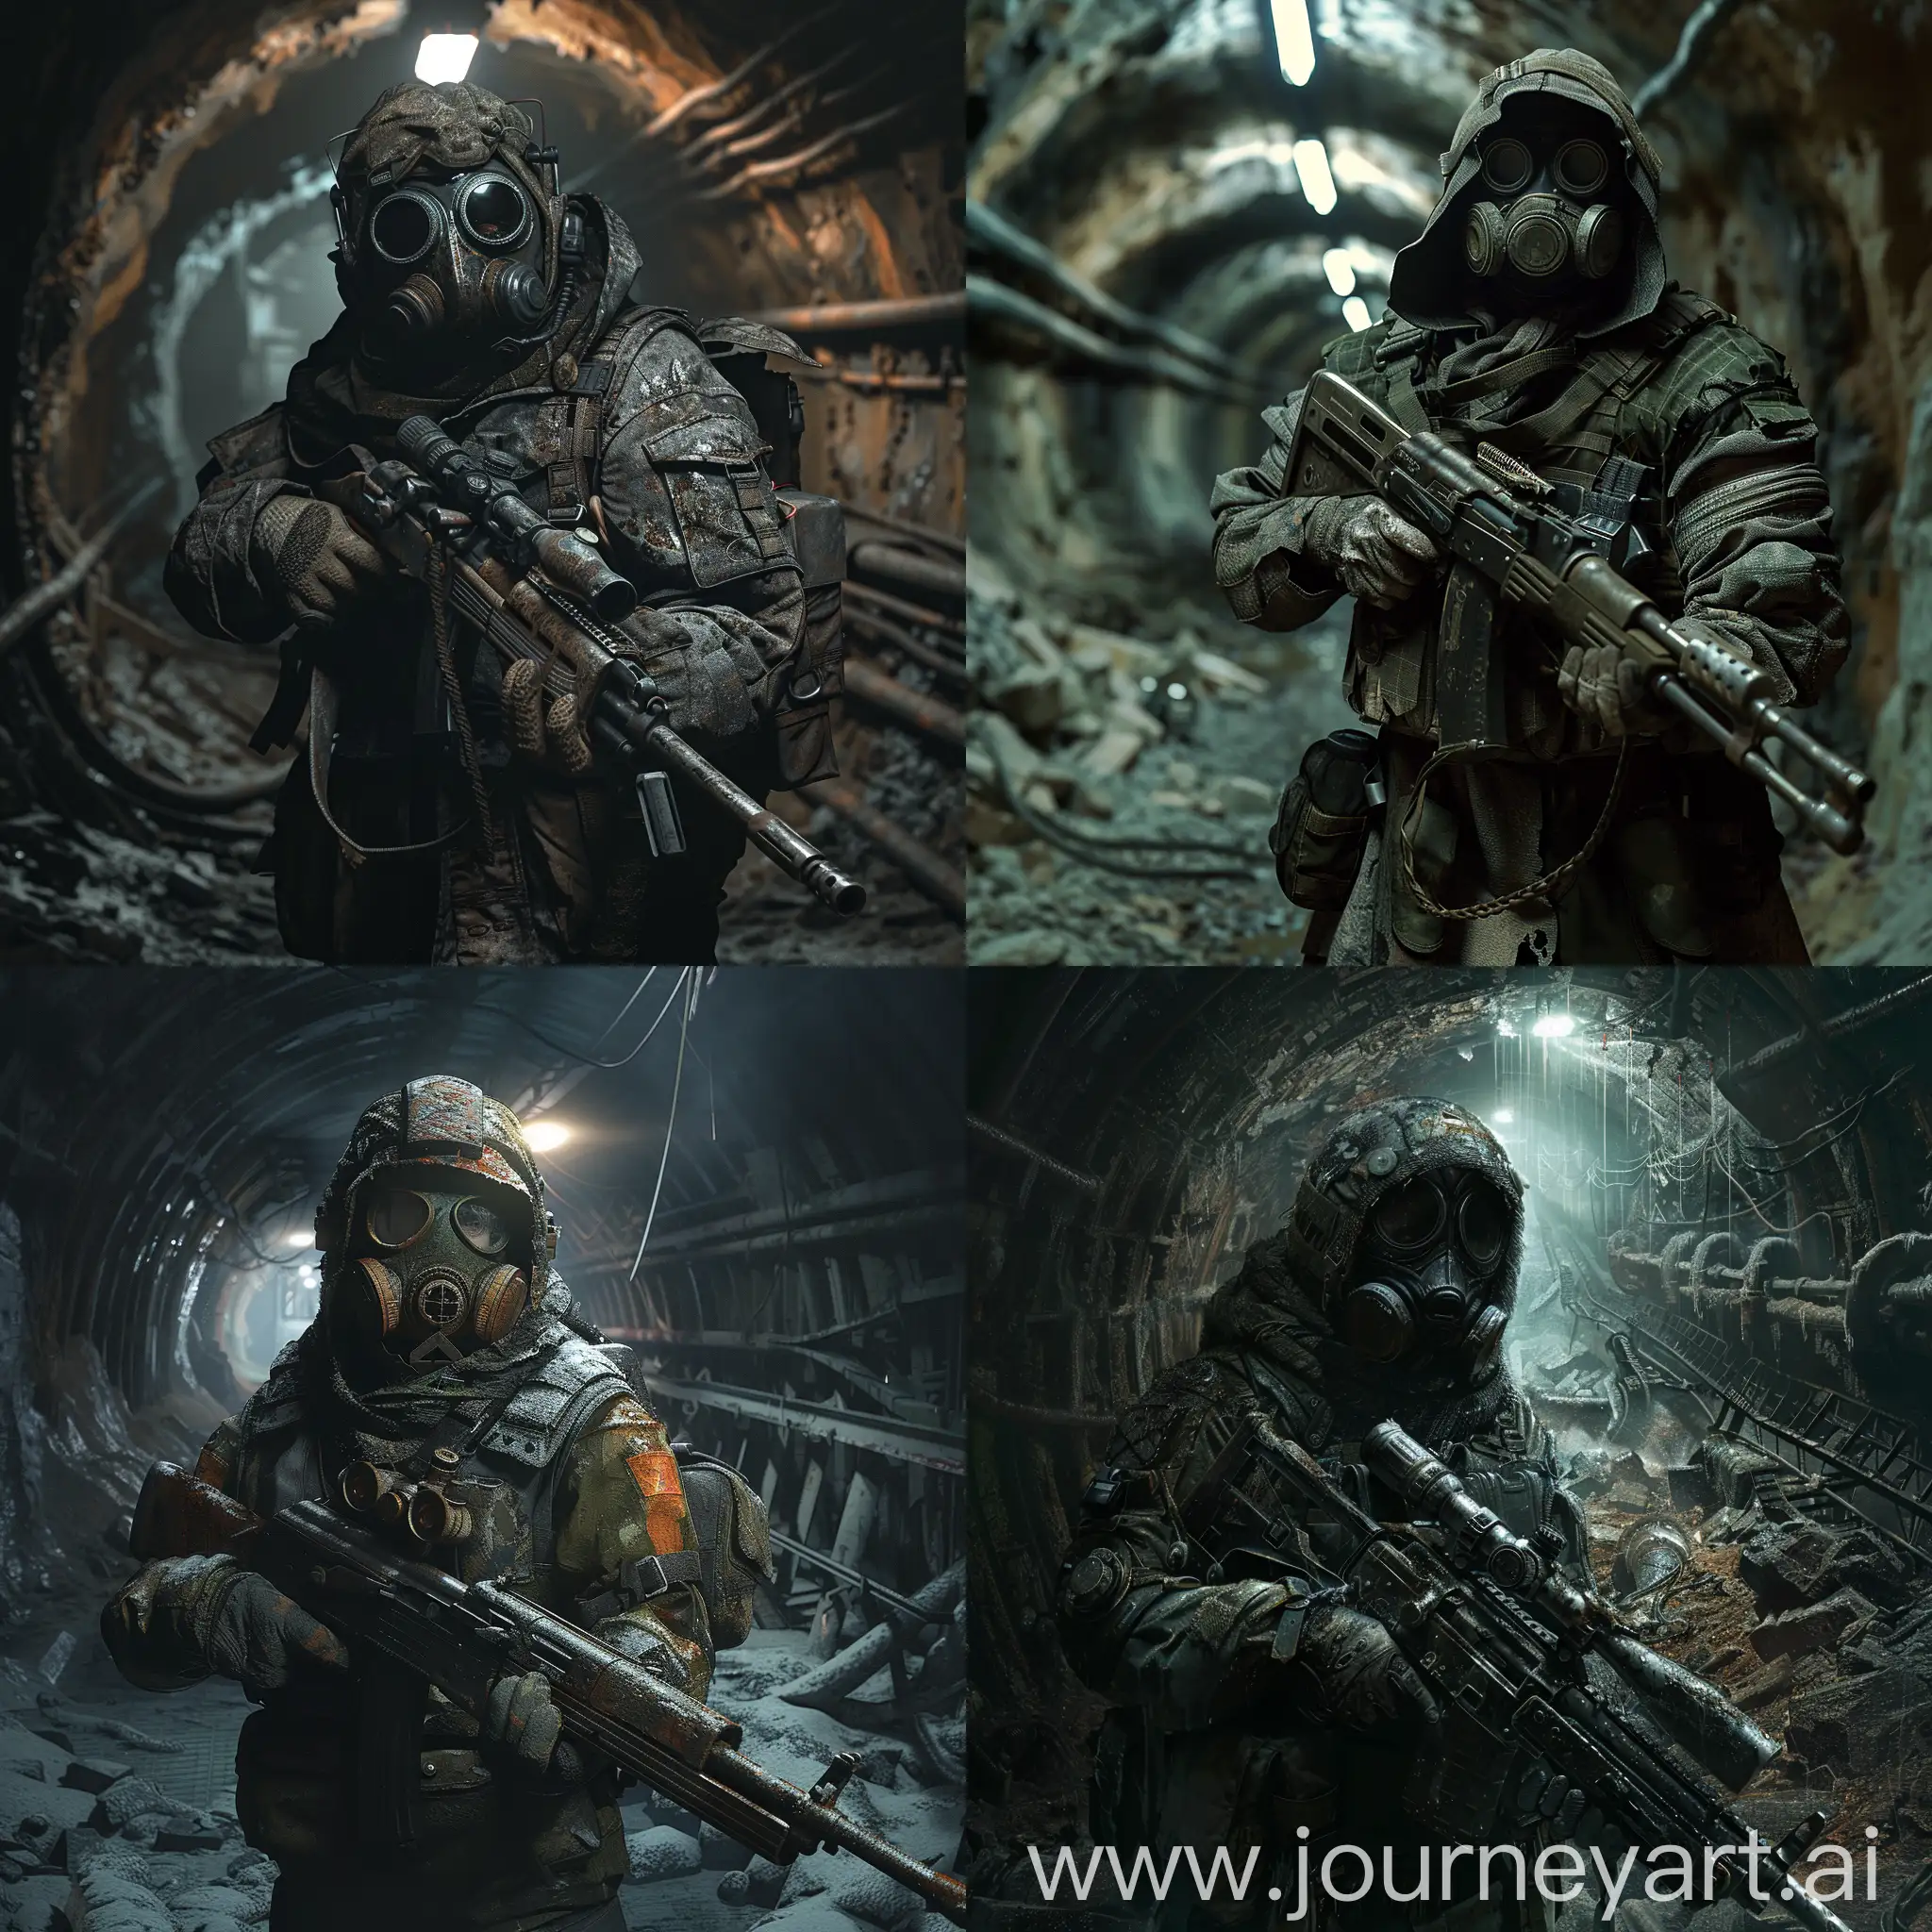 Survivor-in-PostApocalyptic-Catacombs-with-Soviet-Sniper-Rifle